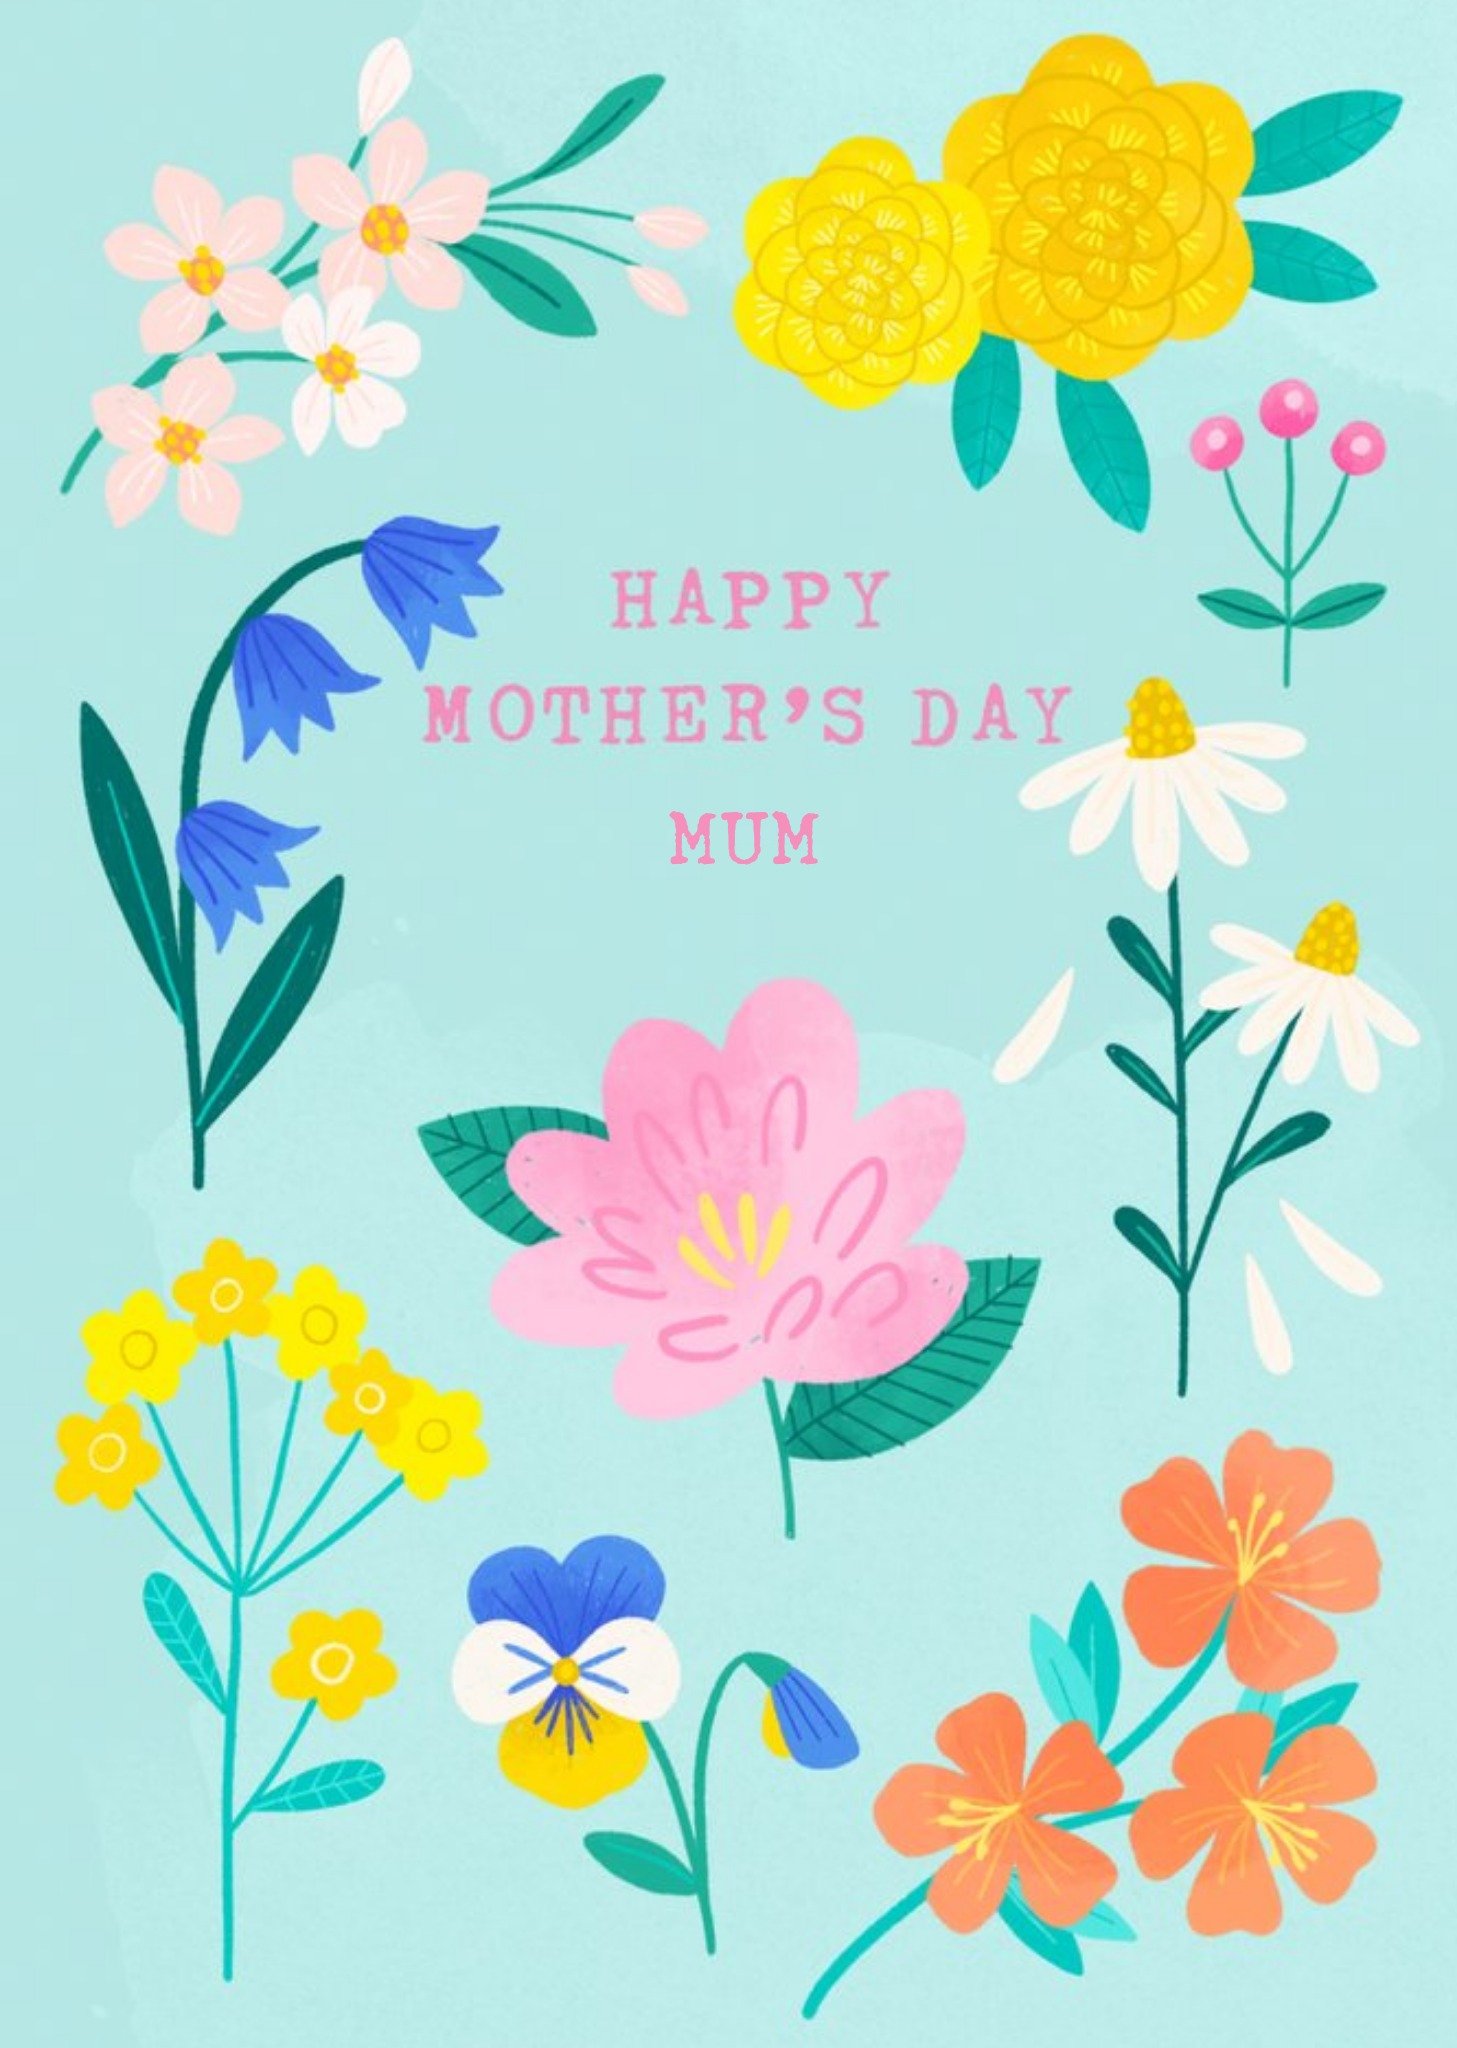 Moonpig Illustrated Bright Floral Happy Mother's Day Mum Card, Large